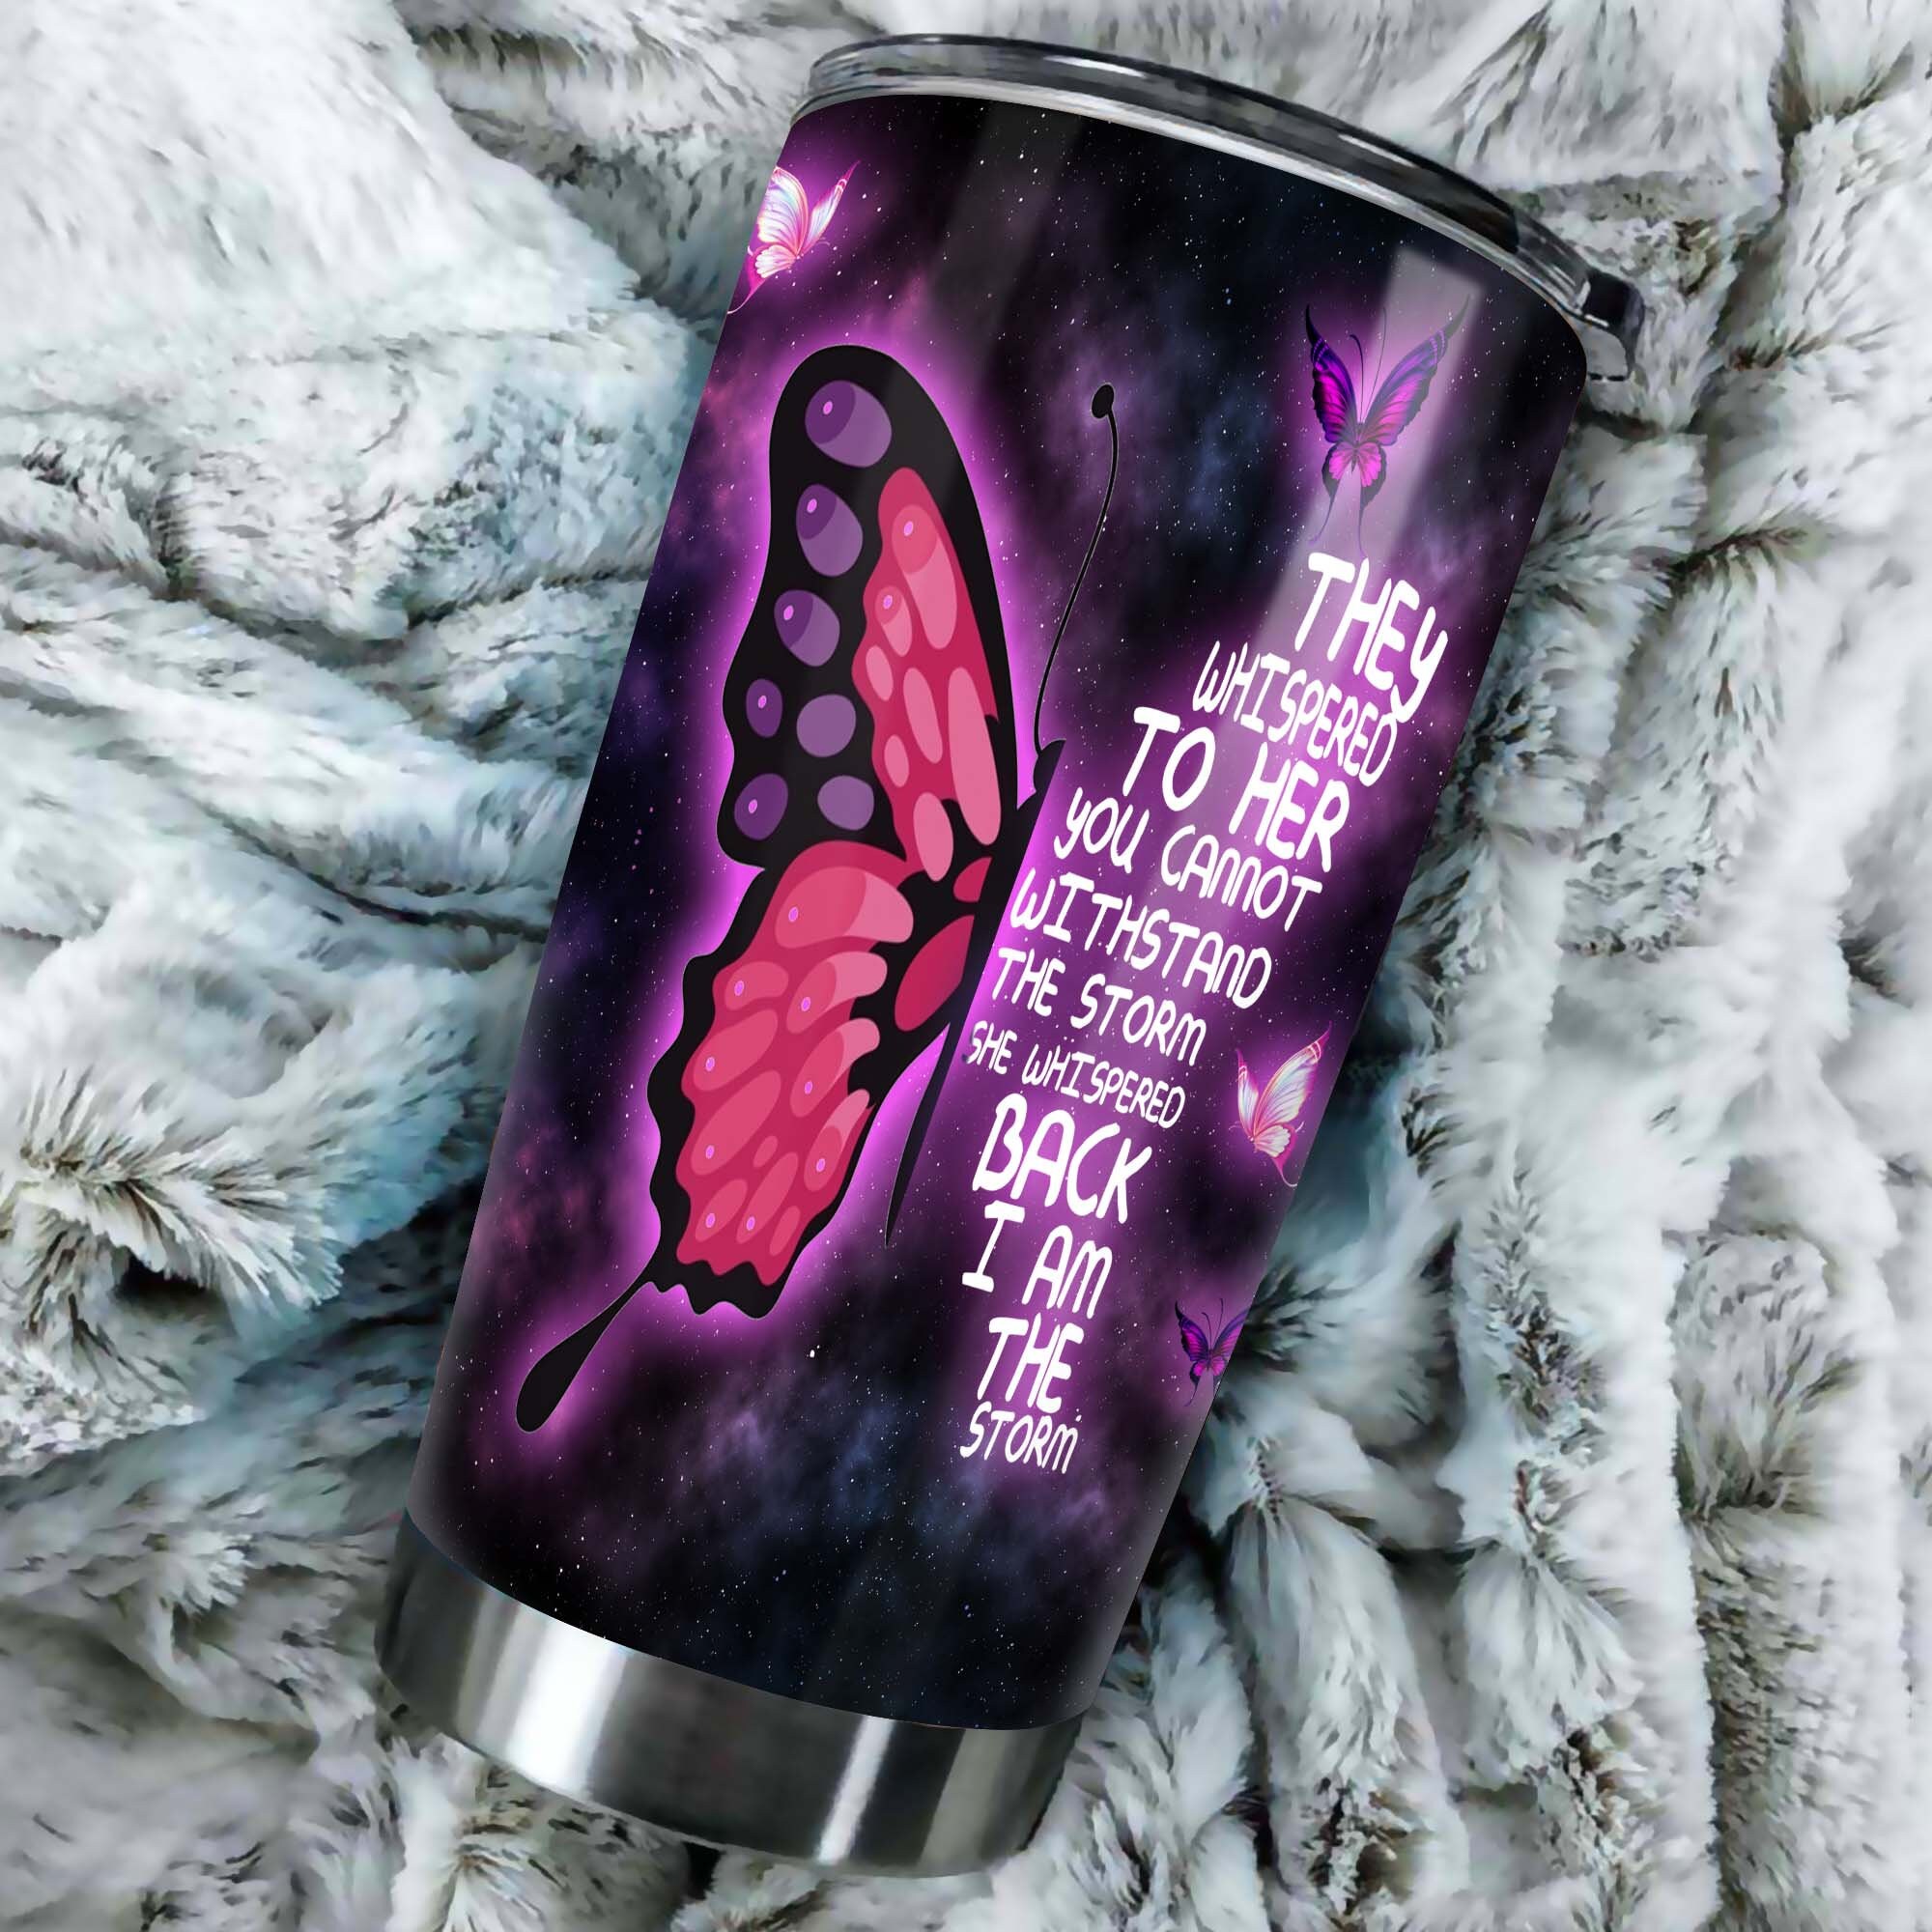 Purple Butterfly Tattoo Girl I Am The Storm Tumbler 20oz